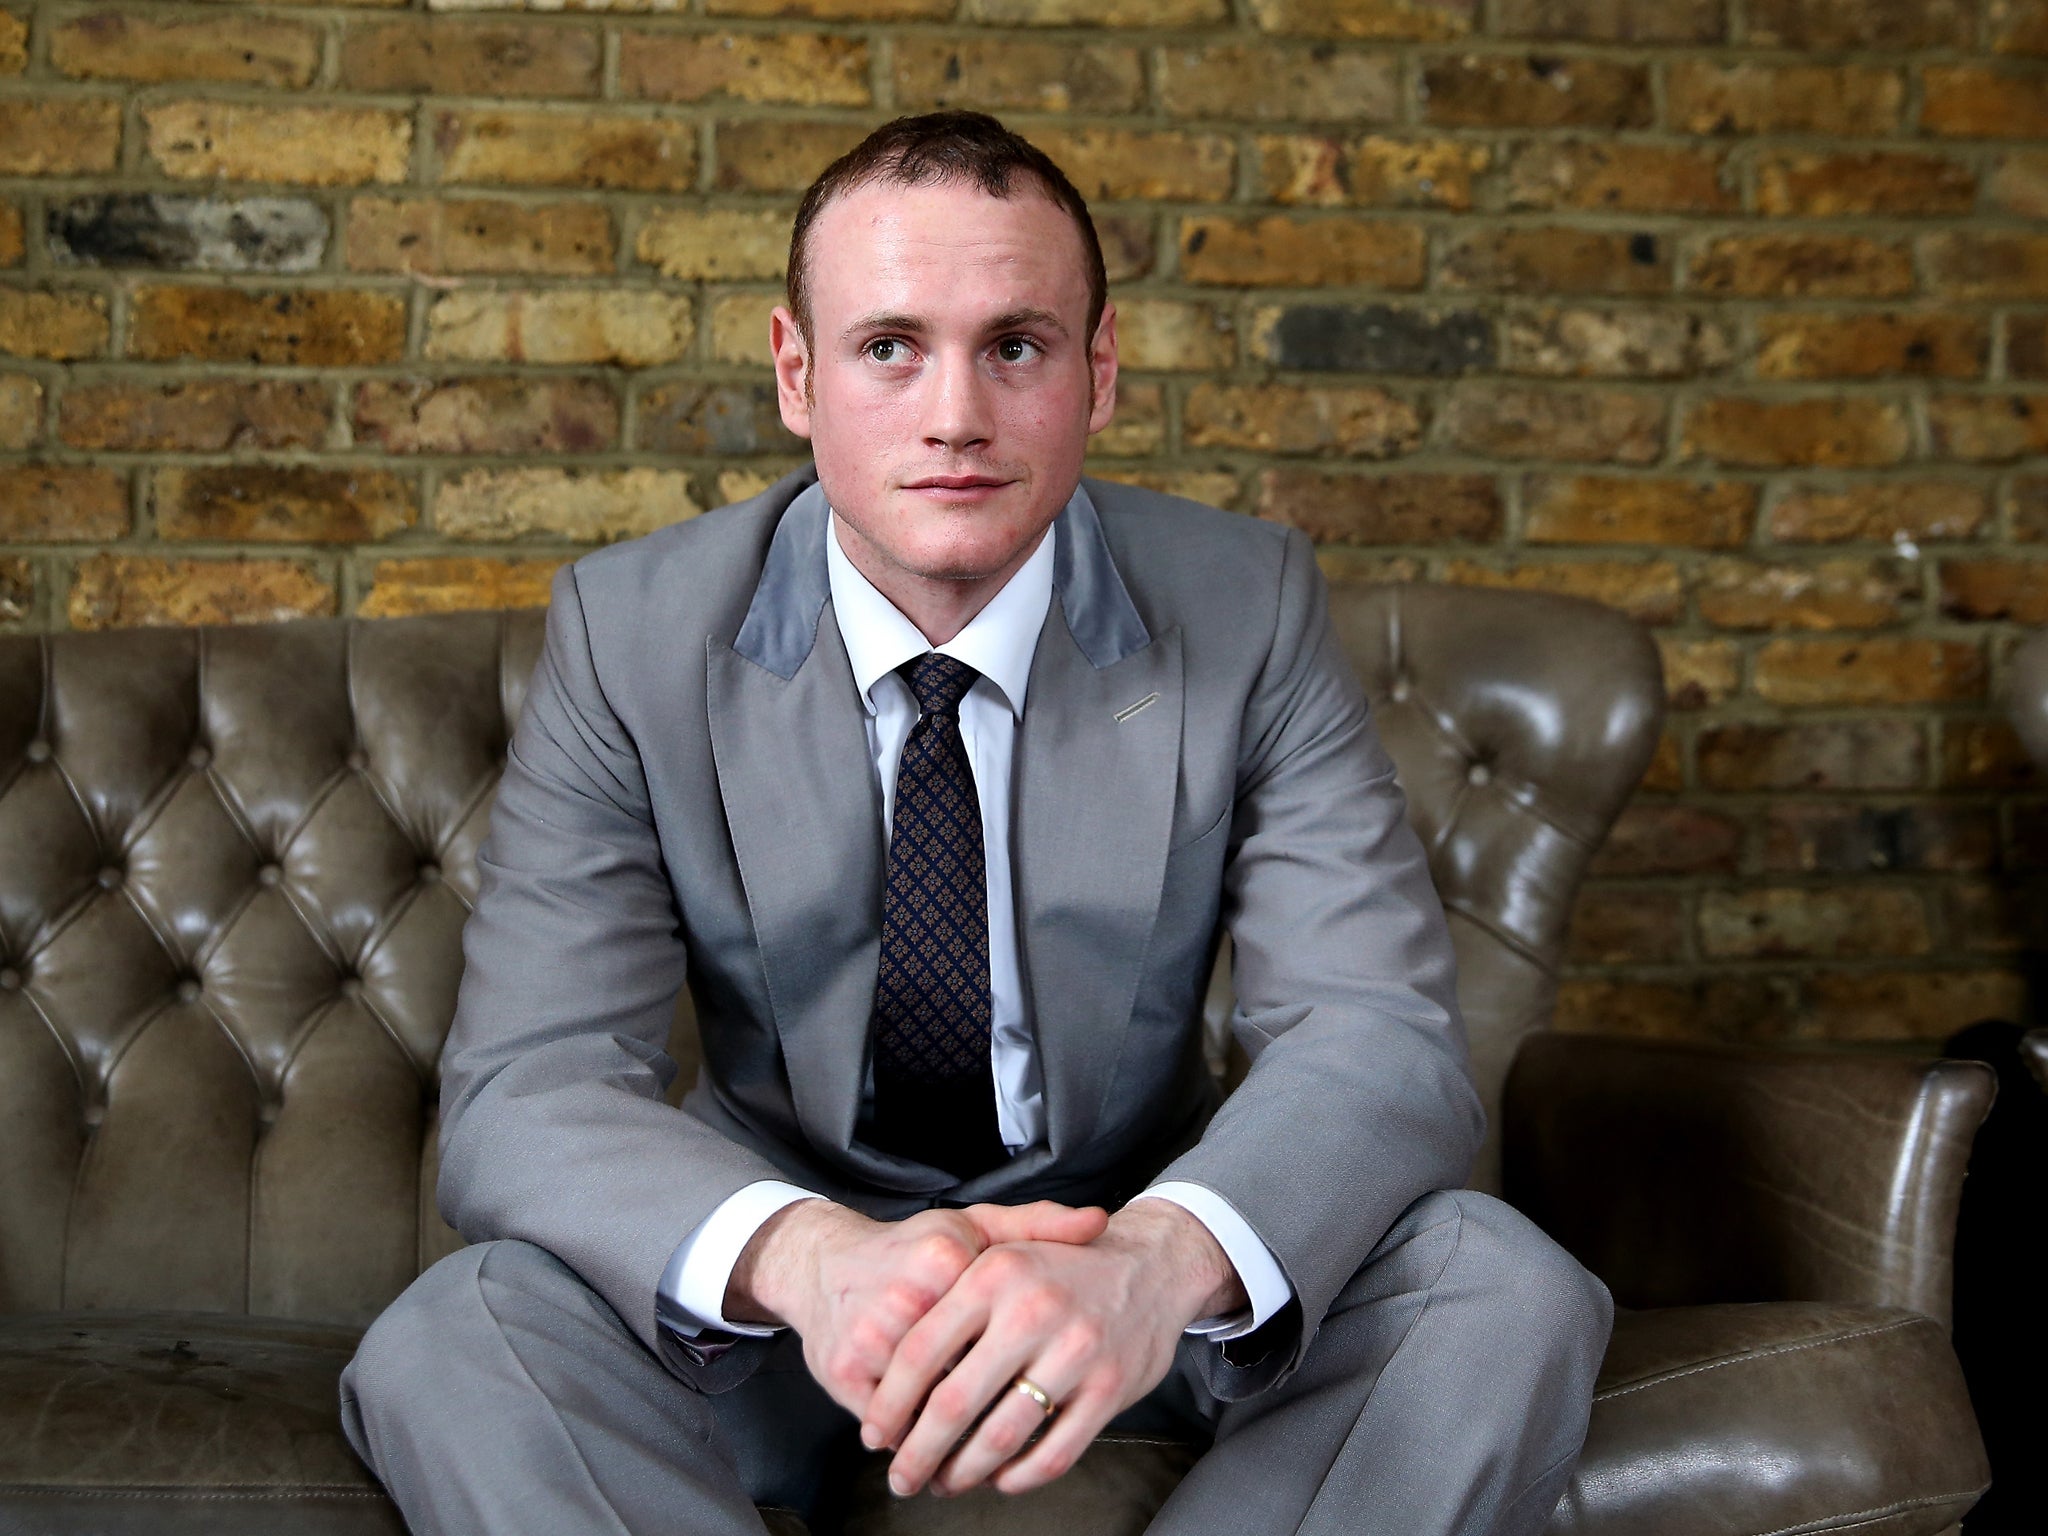 Super Middleweight boxer George Groves attends an SJA lunch on April 3, 2014 in London, England.